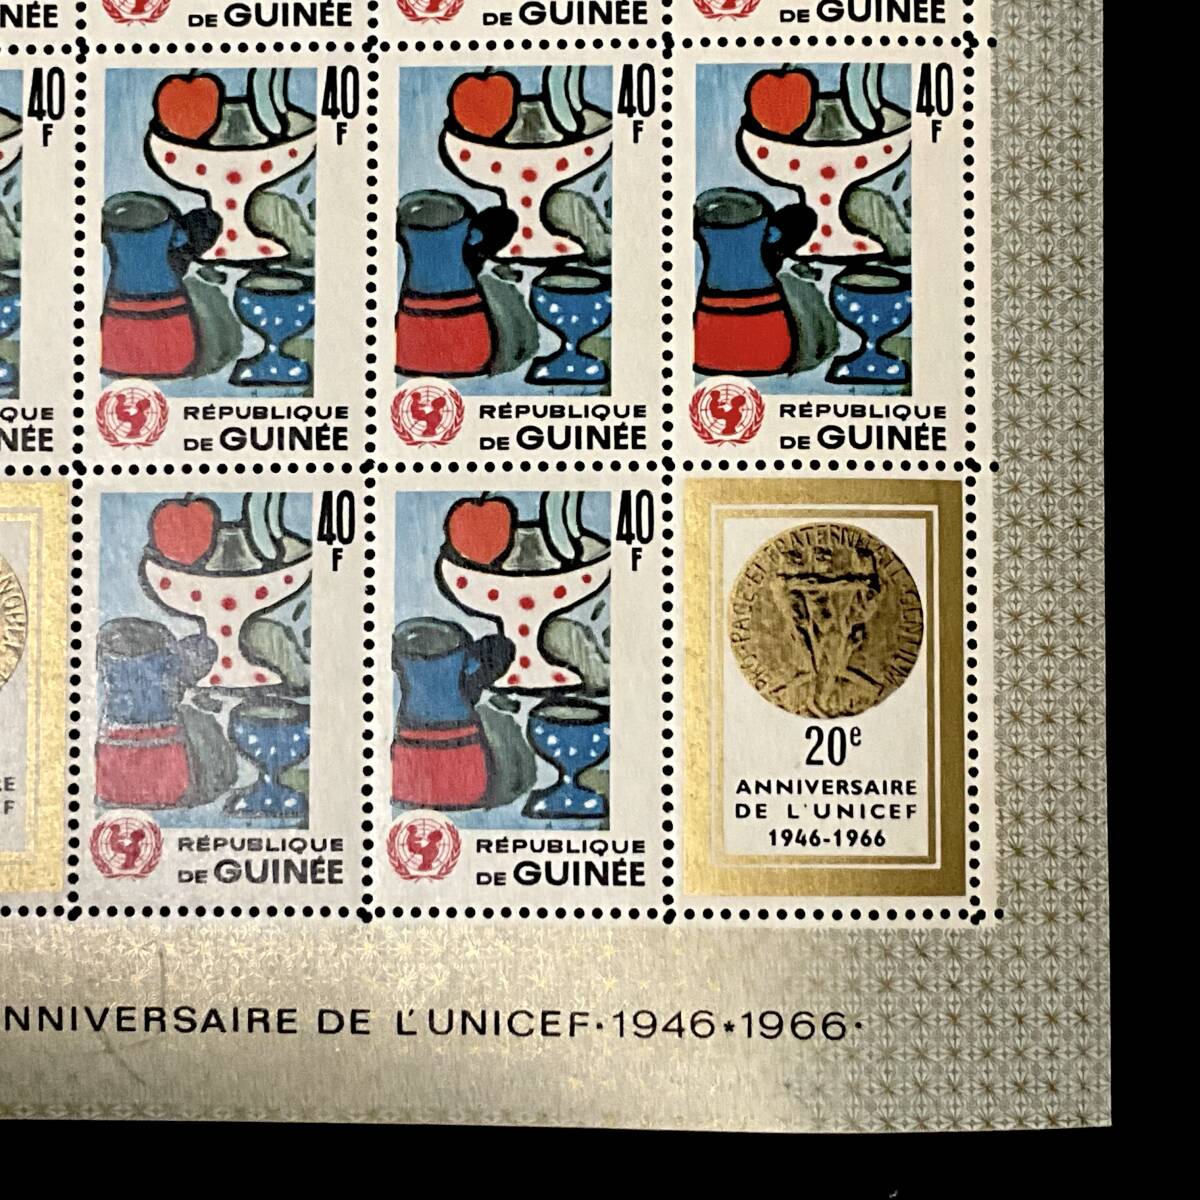 ginia also peace country issue [ fruit stay ru* Uni sef20 anniversary commemoration ] small size seat west Africa 1966 year 12 month 12 day issue unused stamp 